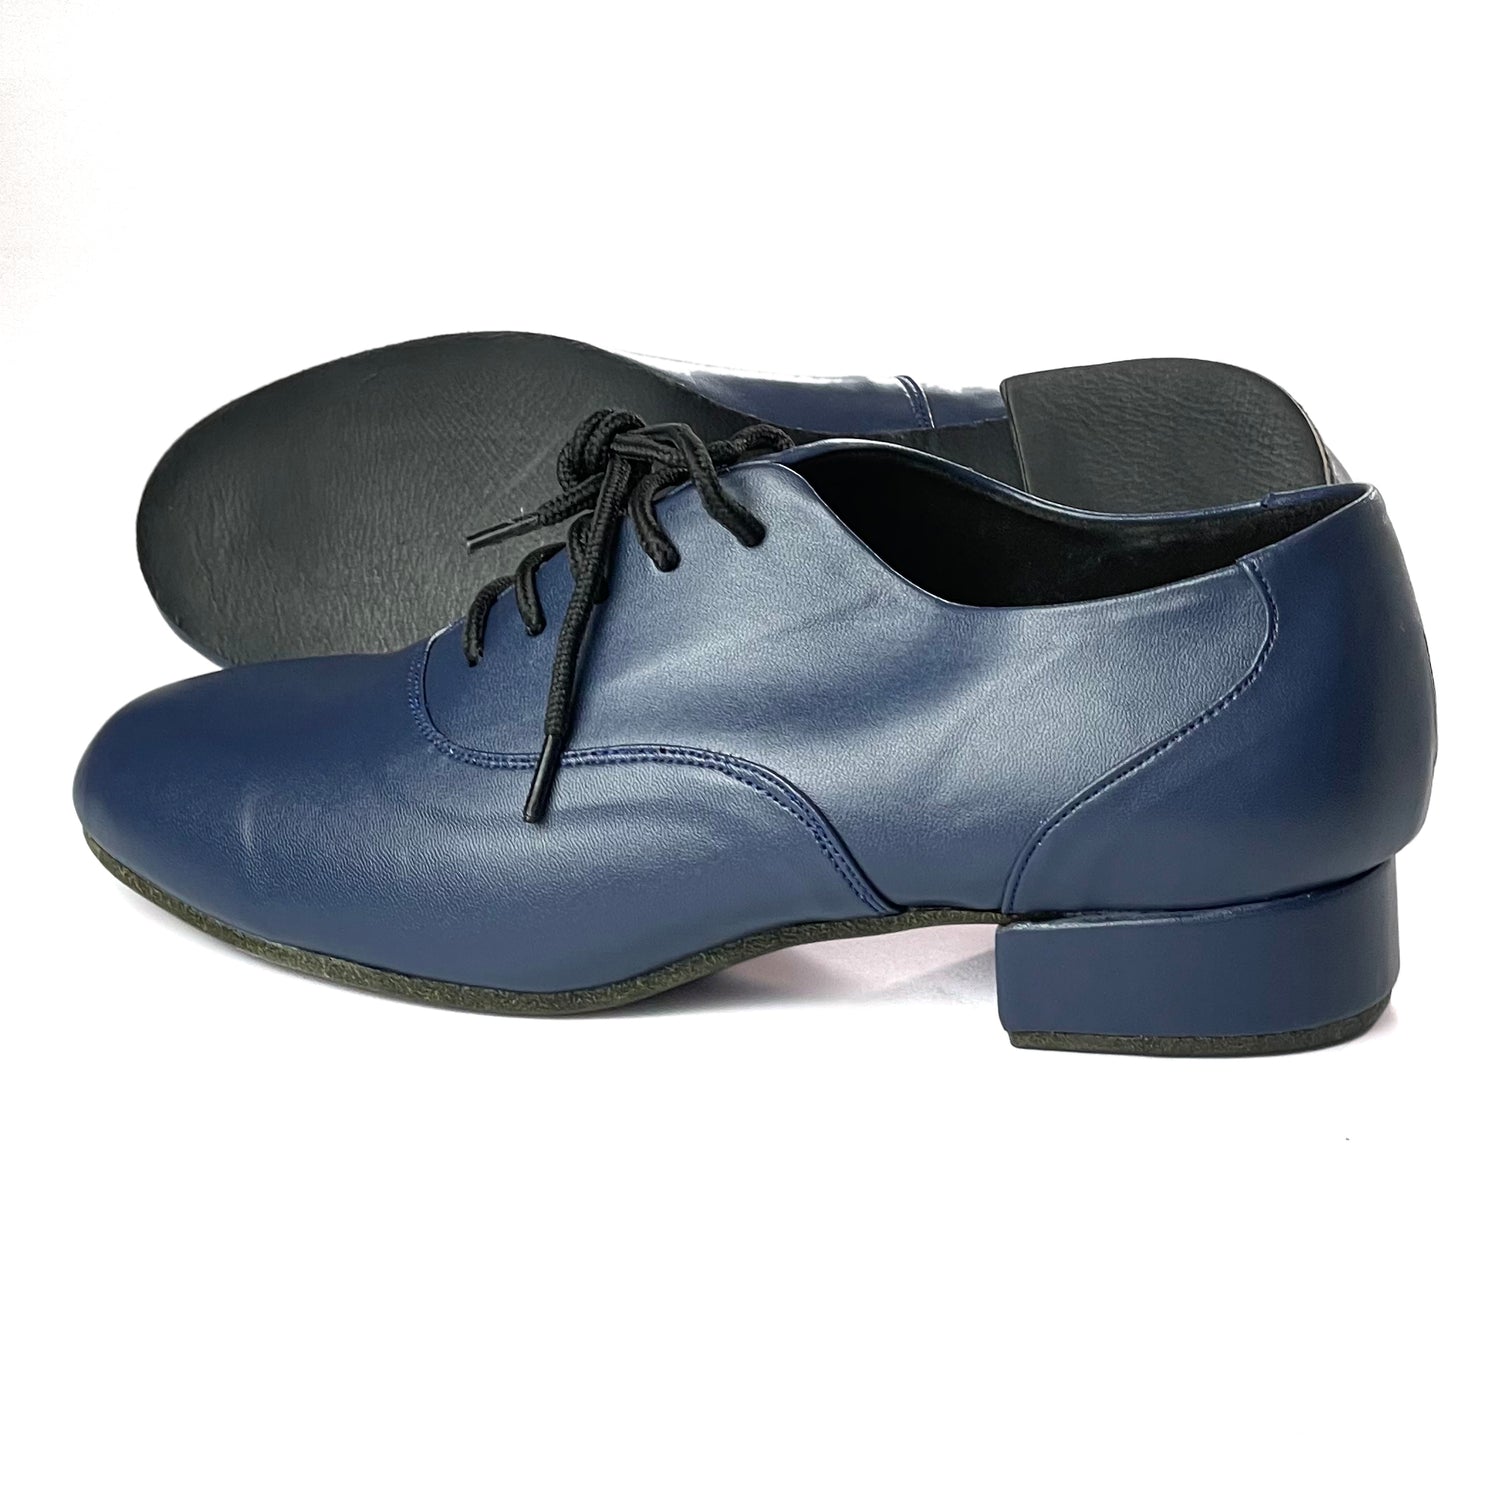 Pro Dancer Men's Blue Leather Tango Shoes with 1 Inch Heel PD-1004C5